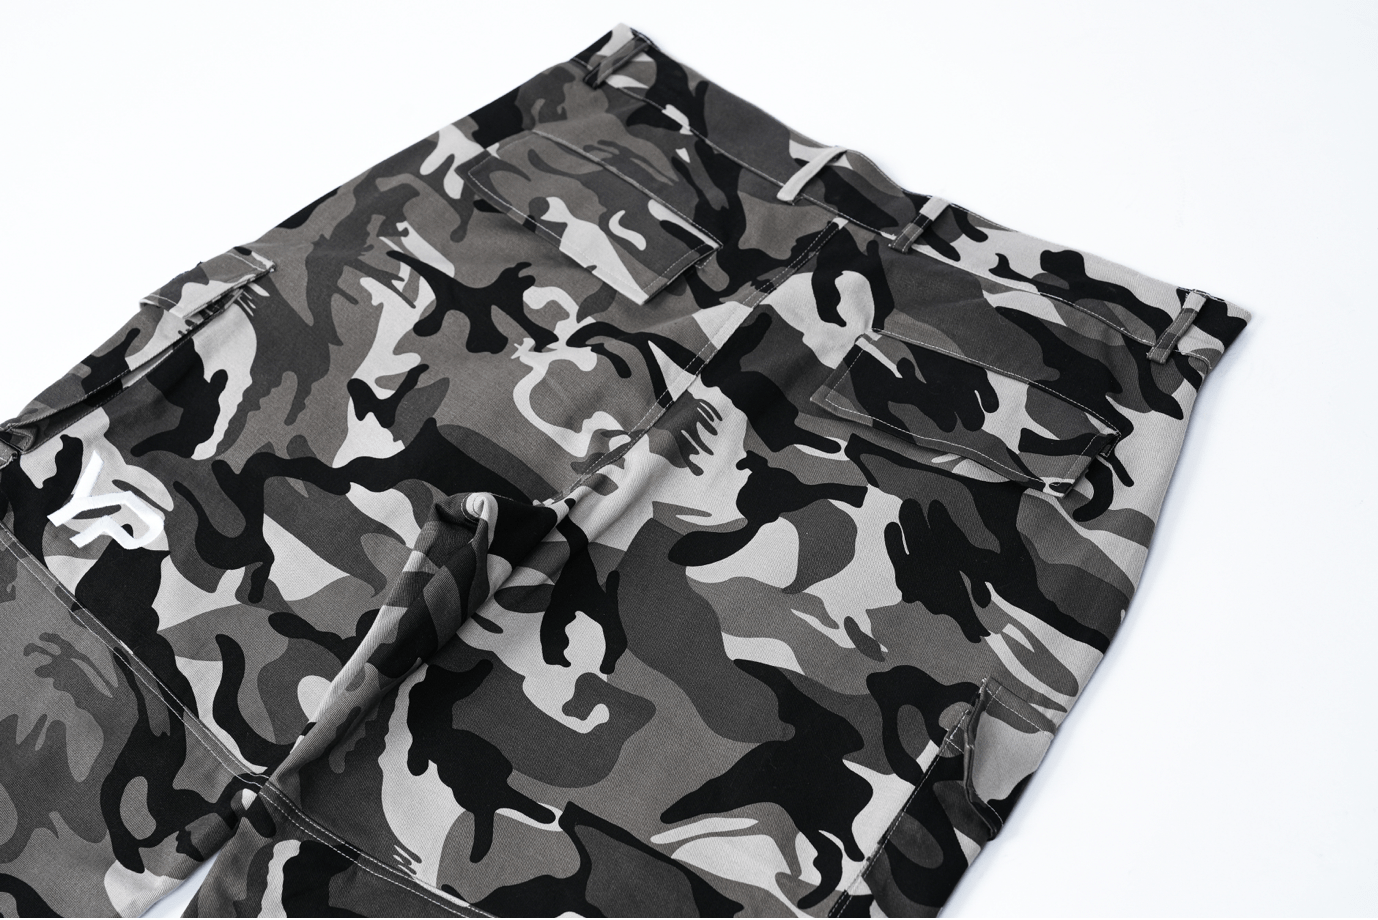 YP CAMO SUIT TOP AND BOTTOM TRACKPANTS